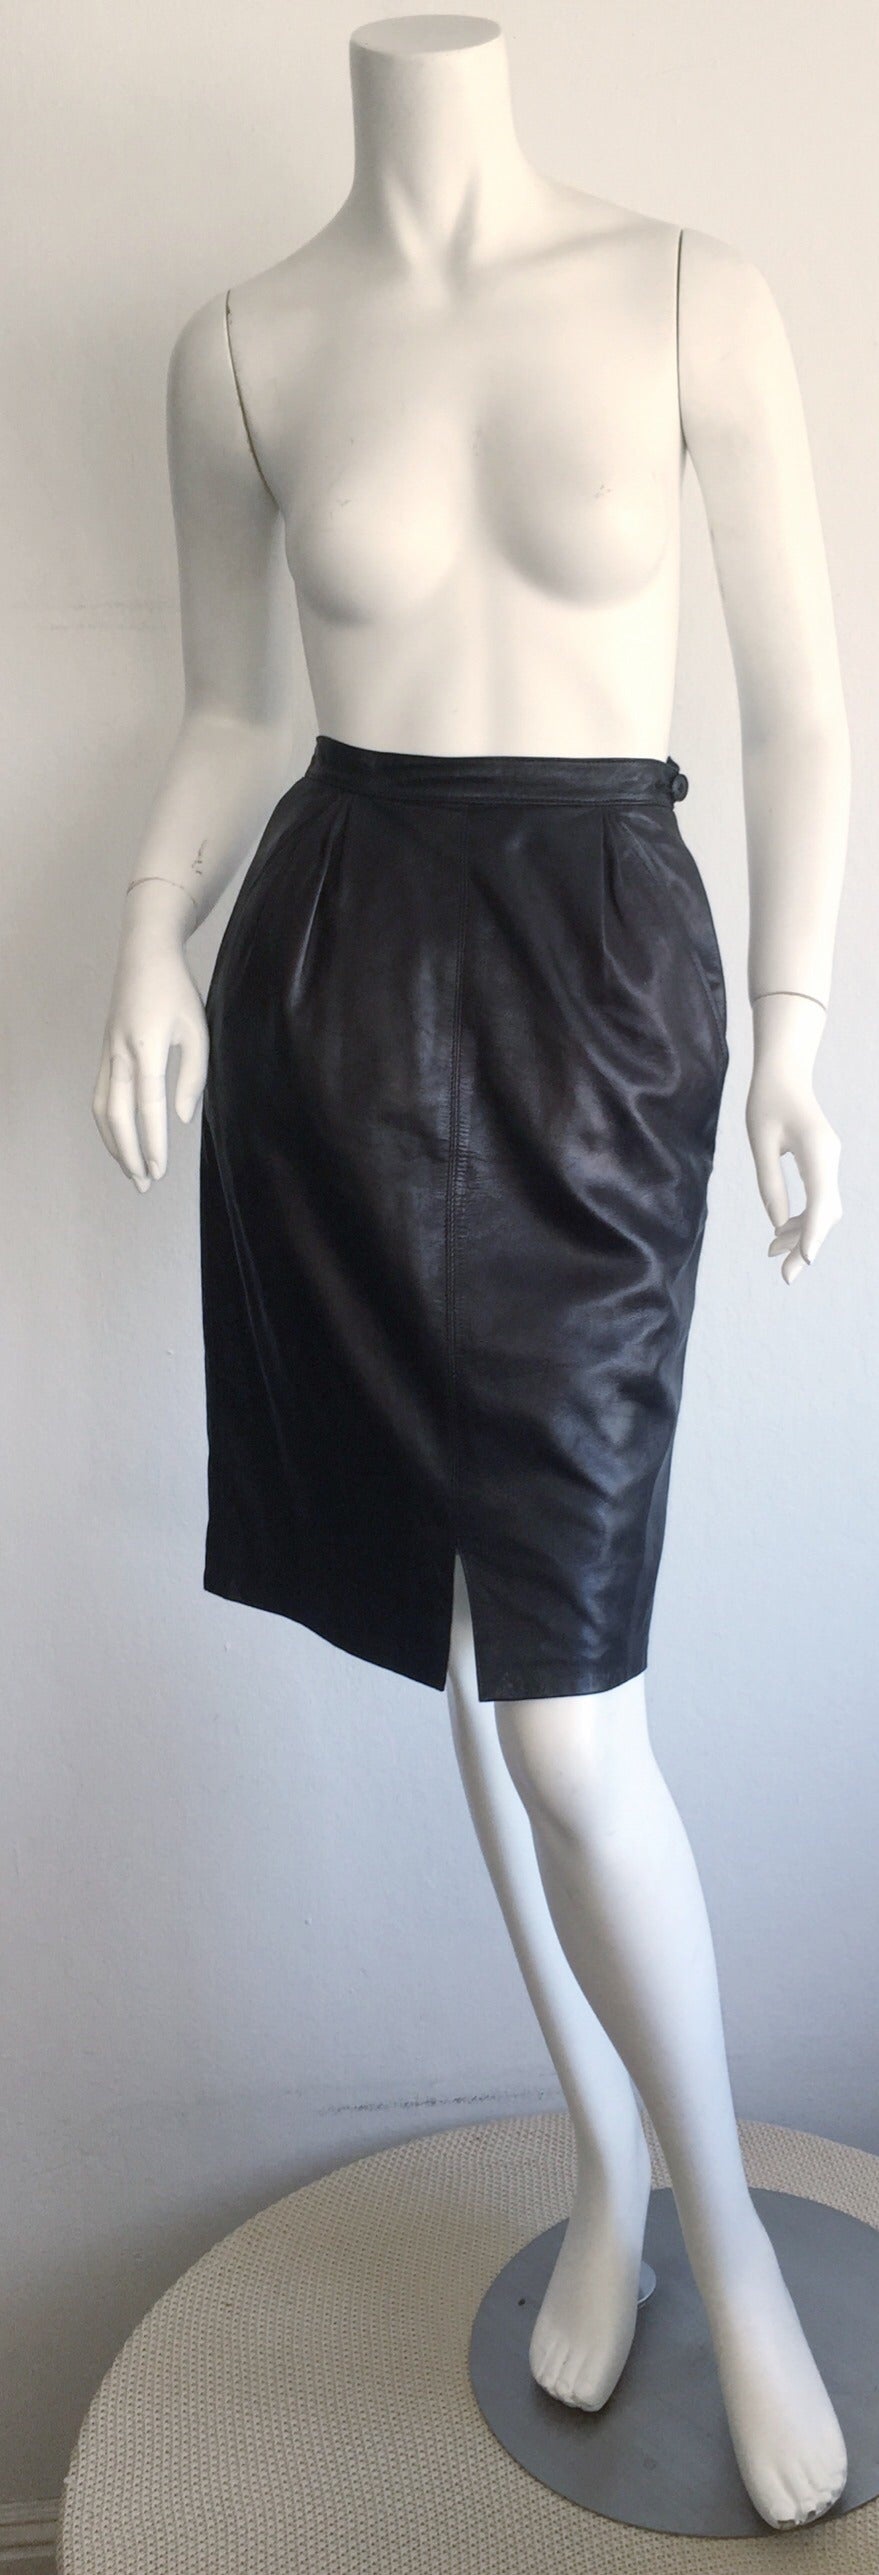 Incredibly sexy vintage Yves Saint Laurent YSL ‘Rive Gauche' black leather skirt!!! High-waisted pencil style, with pockets at both sides of waist. Slight slit up middle front makes easier for walking. Looks great casual or dressy! Fully lined. 100%